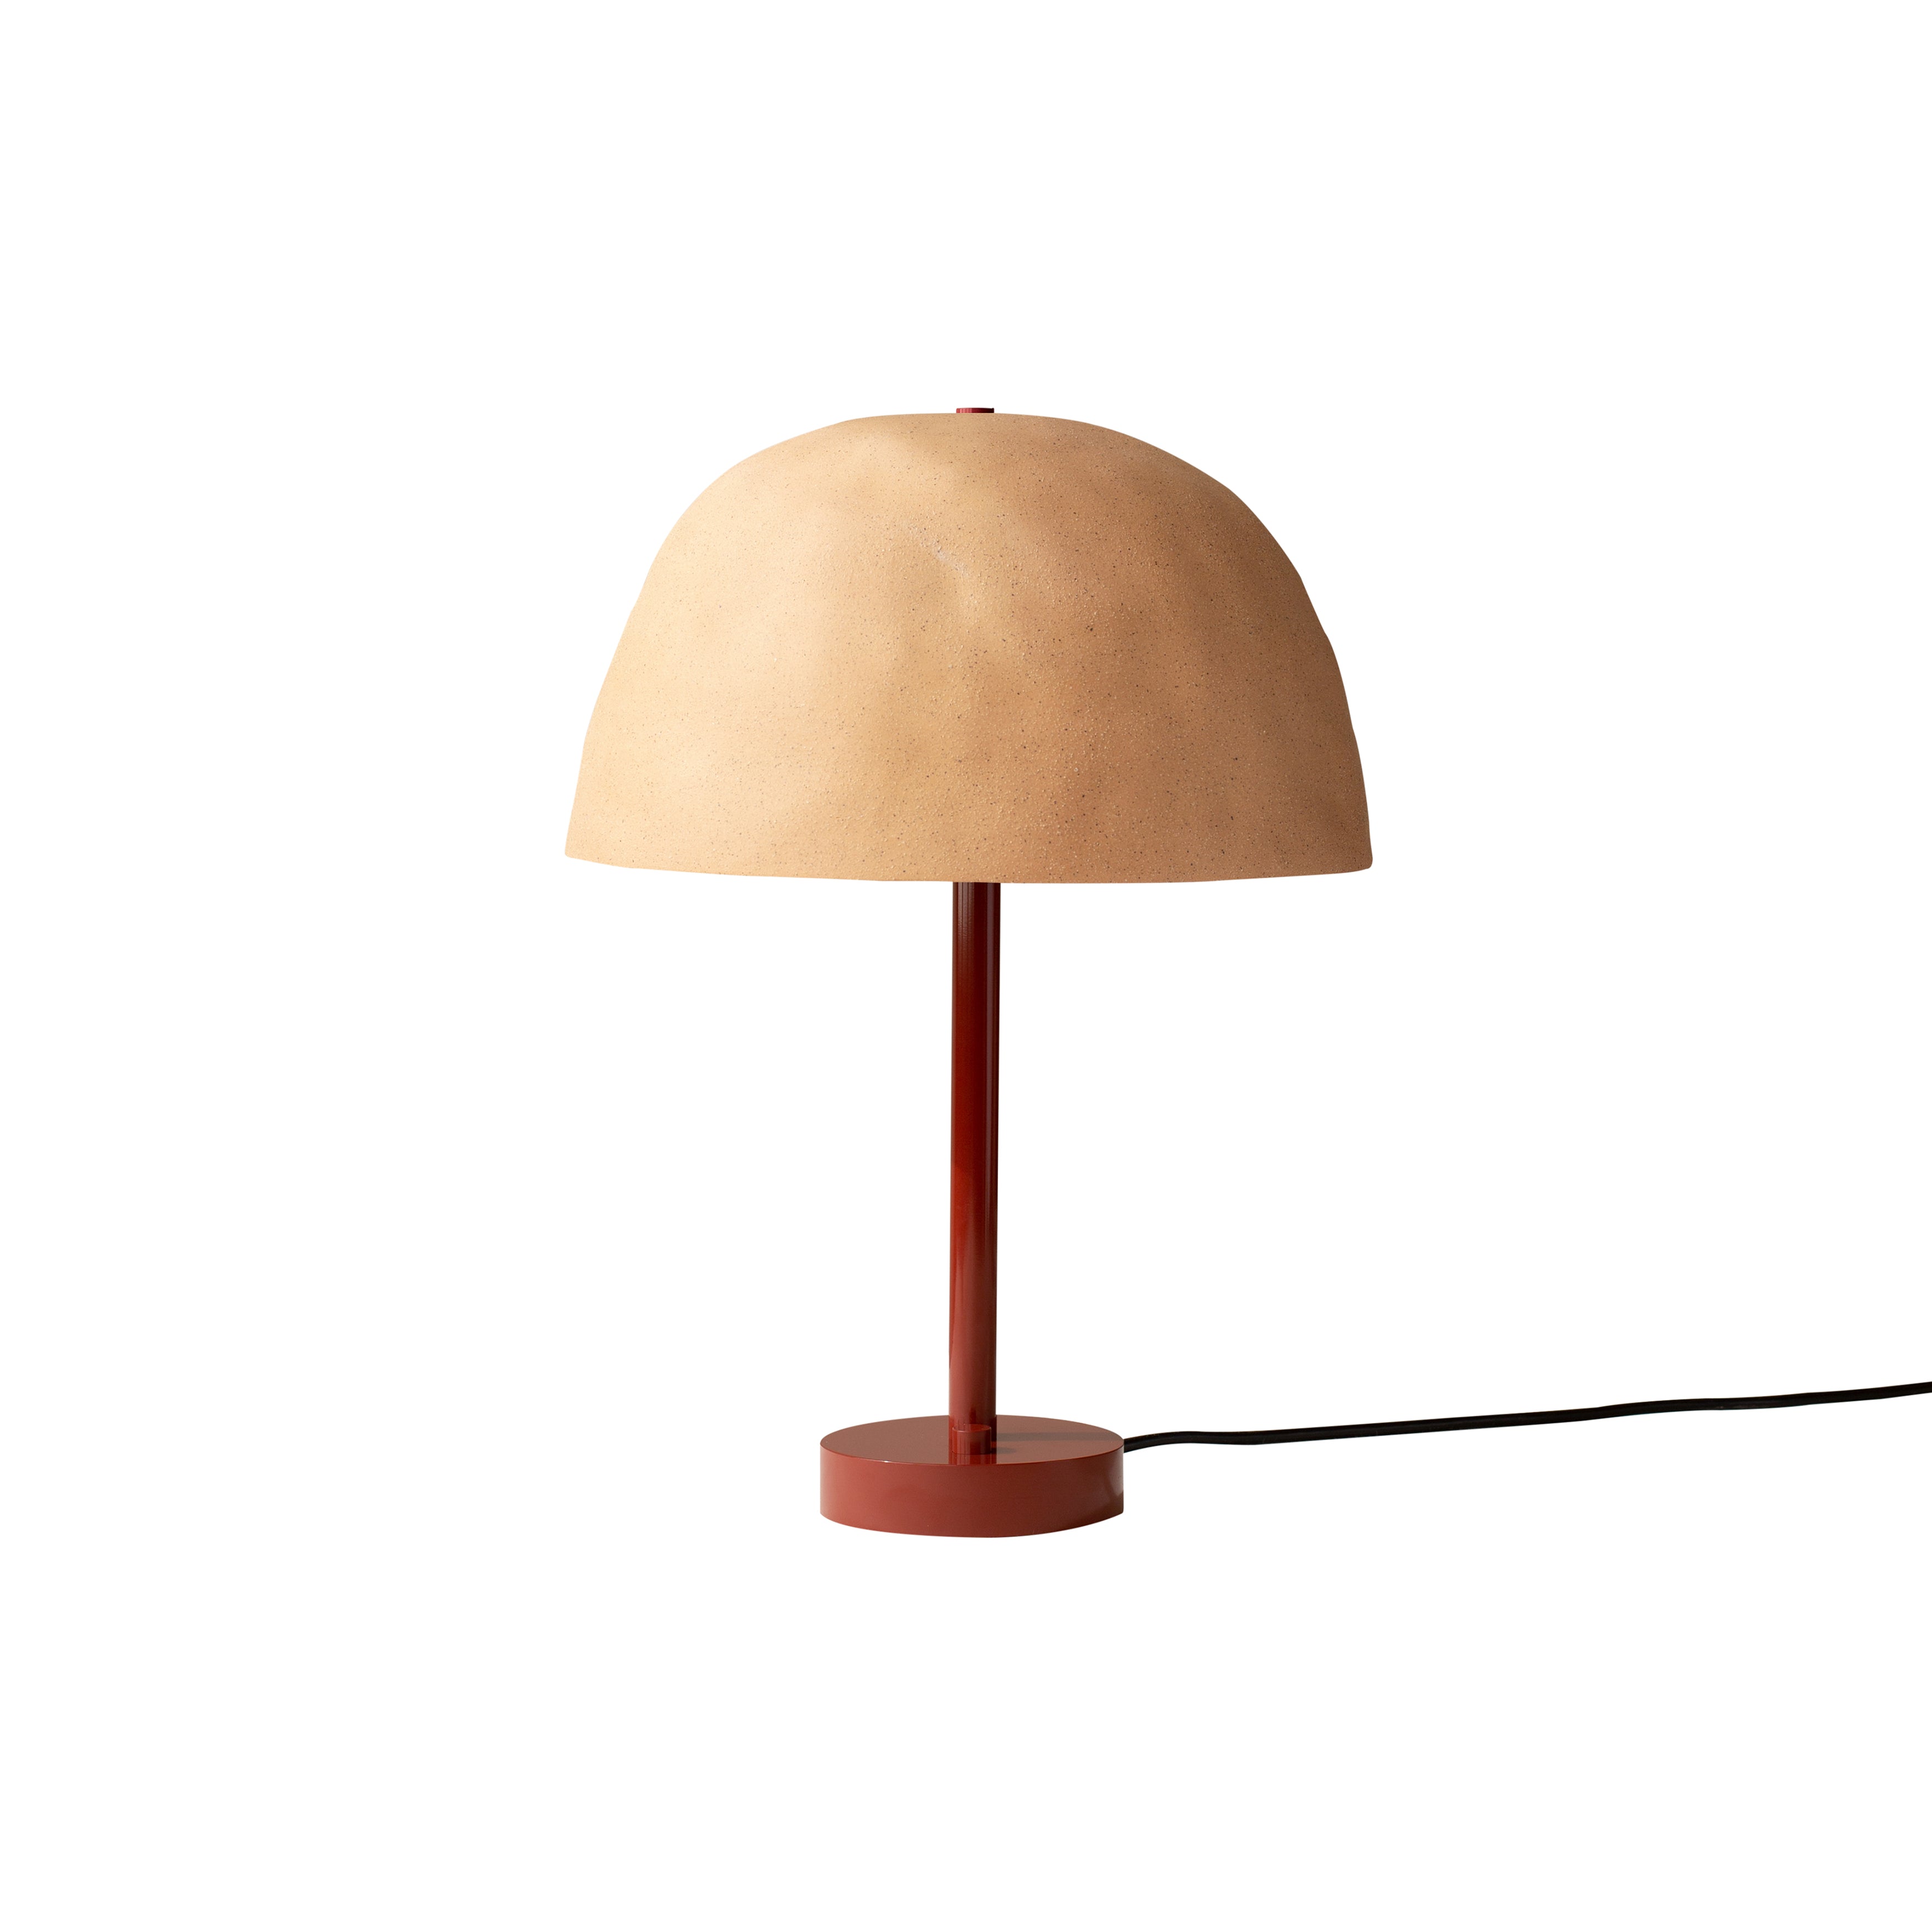 Dome Table Lamp: Tan Clay + Oxide Red